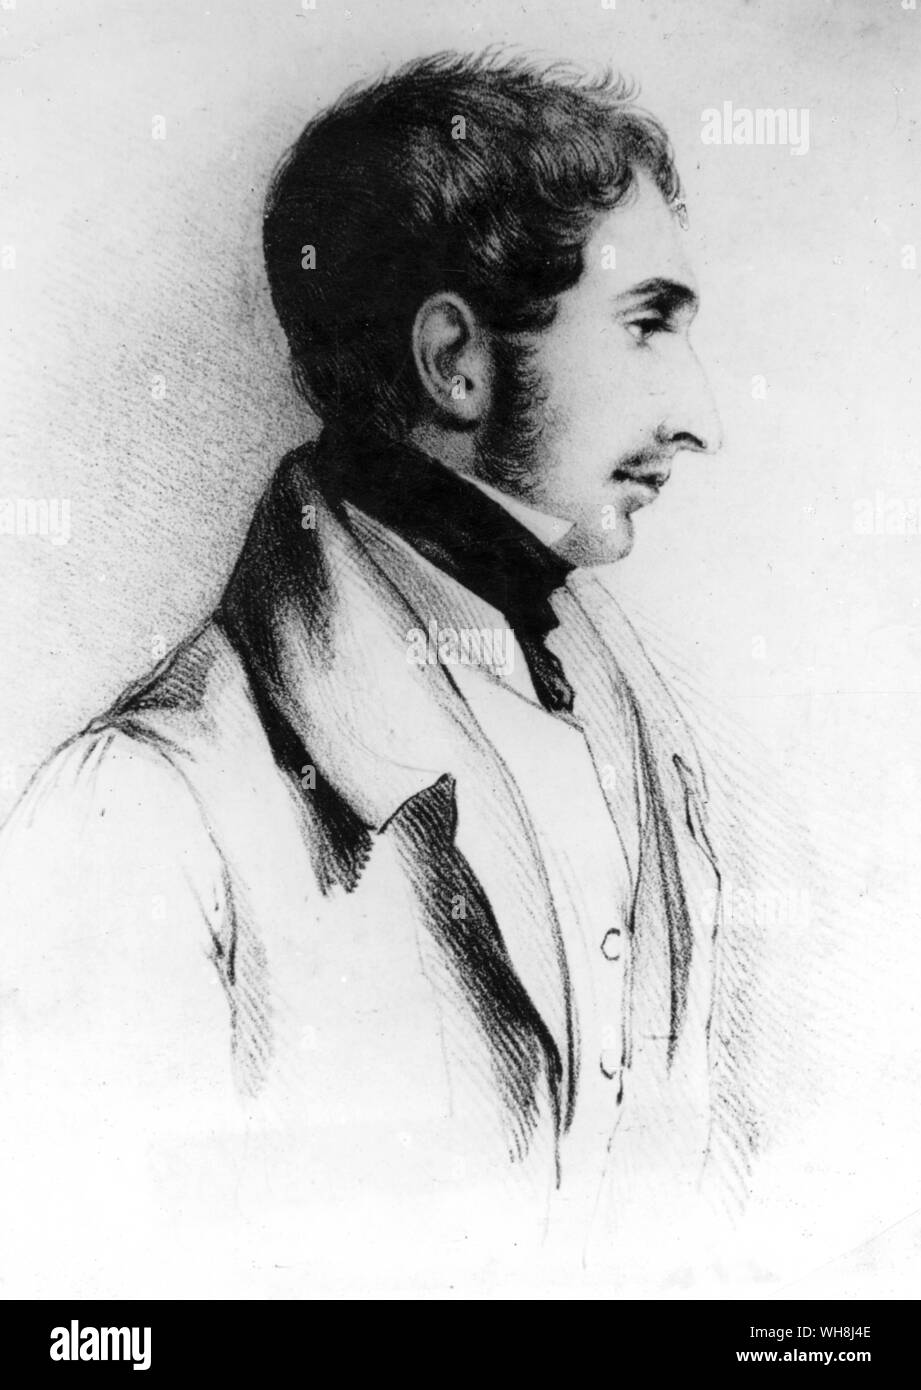 Robert FitzRoy (1805-1865) in his twenties. 'He was a handsome man, strikingly like a gentleman, with highly courteous manners...' FitzRoy achieved lasting fame as the captain of HMS Beagle and as a pioneering meteorologist who invented weather forecasts, also proving an able surveyor and hydrographer as well as Governor of New Zealand. Darwin and the Beagle by Alan Moorhead, page 21.. . Stock Photo